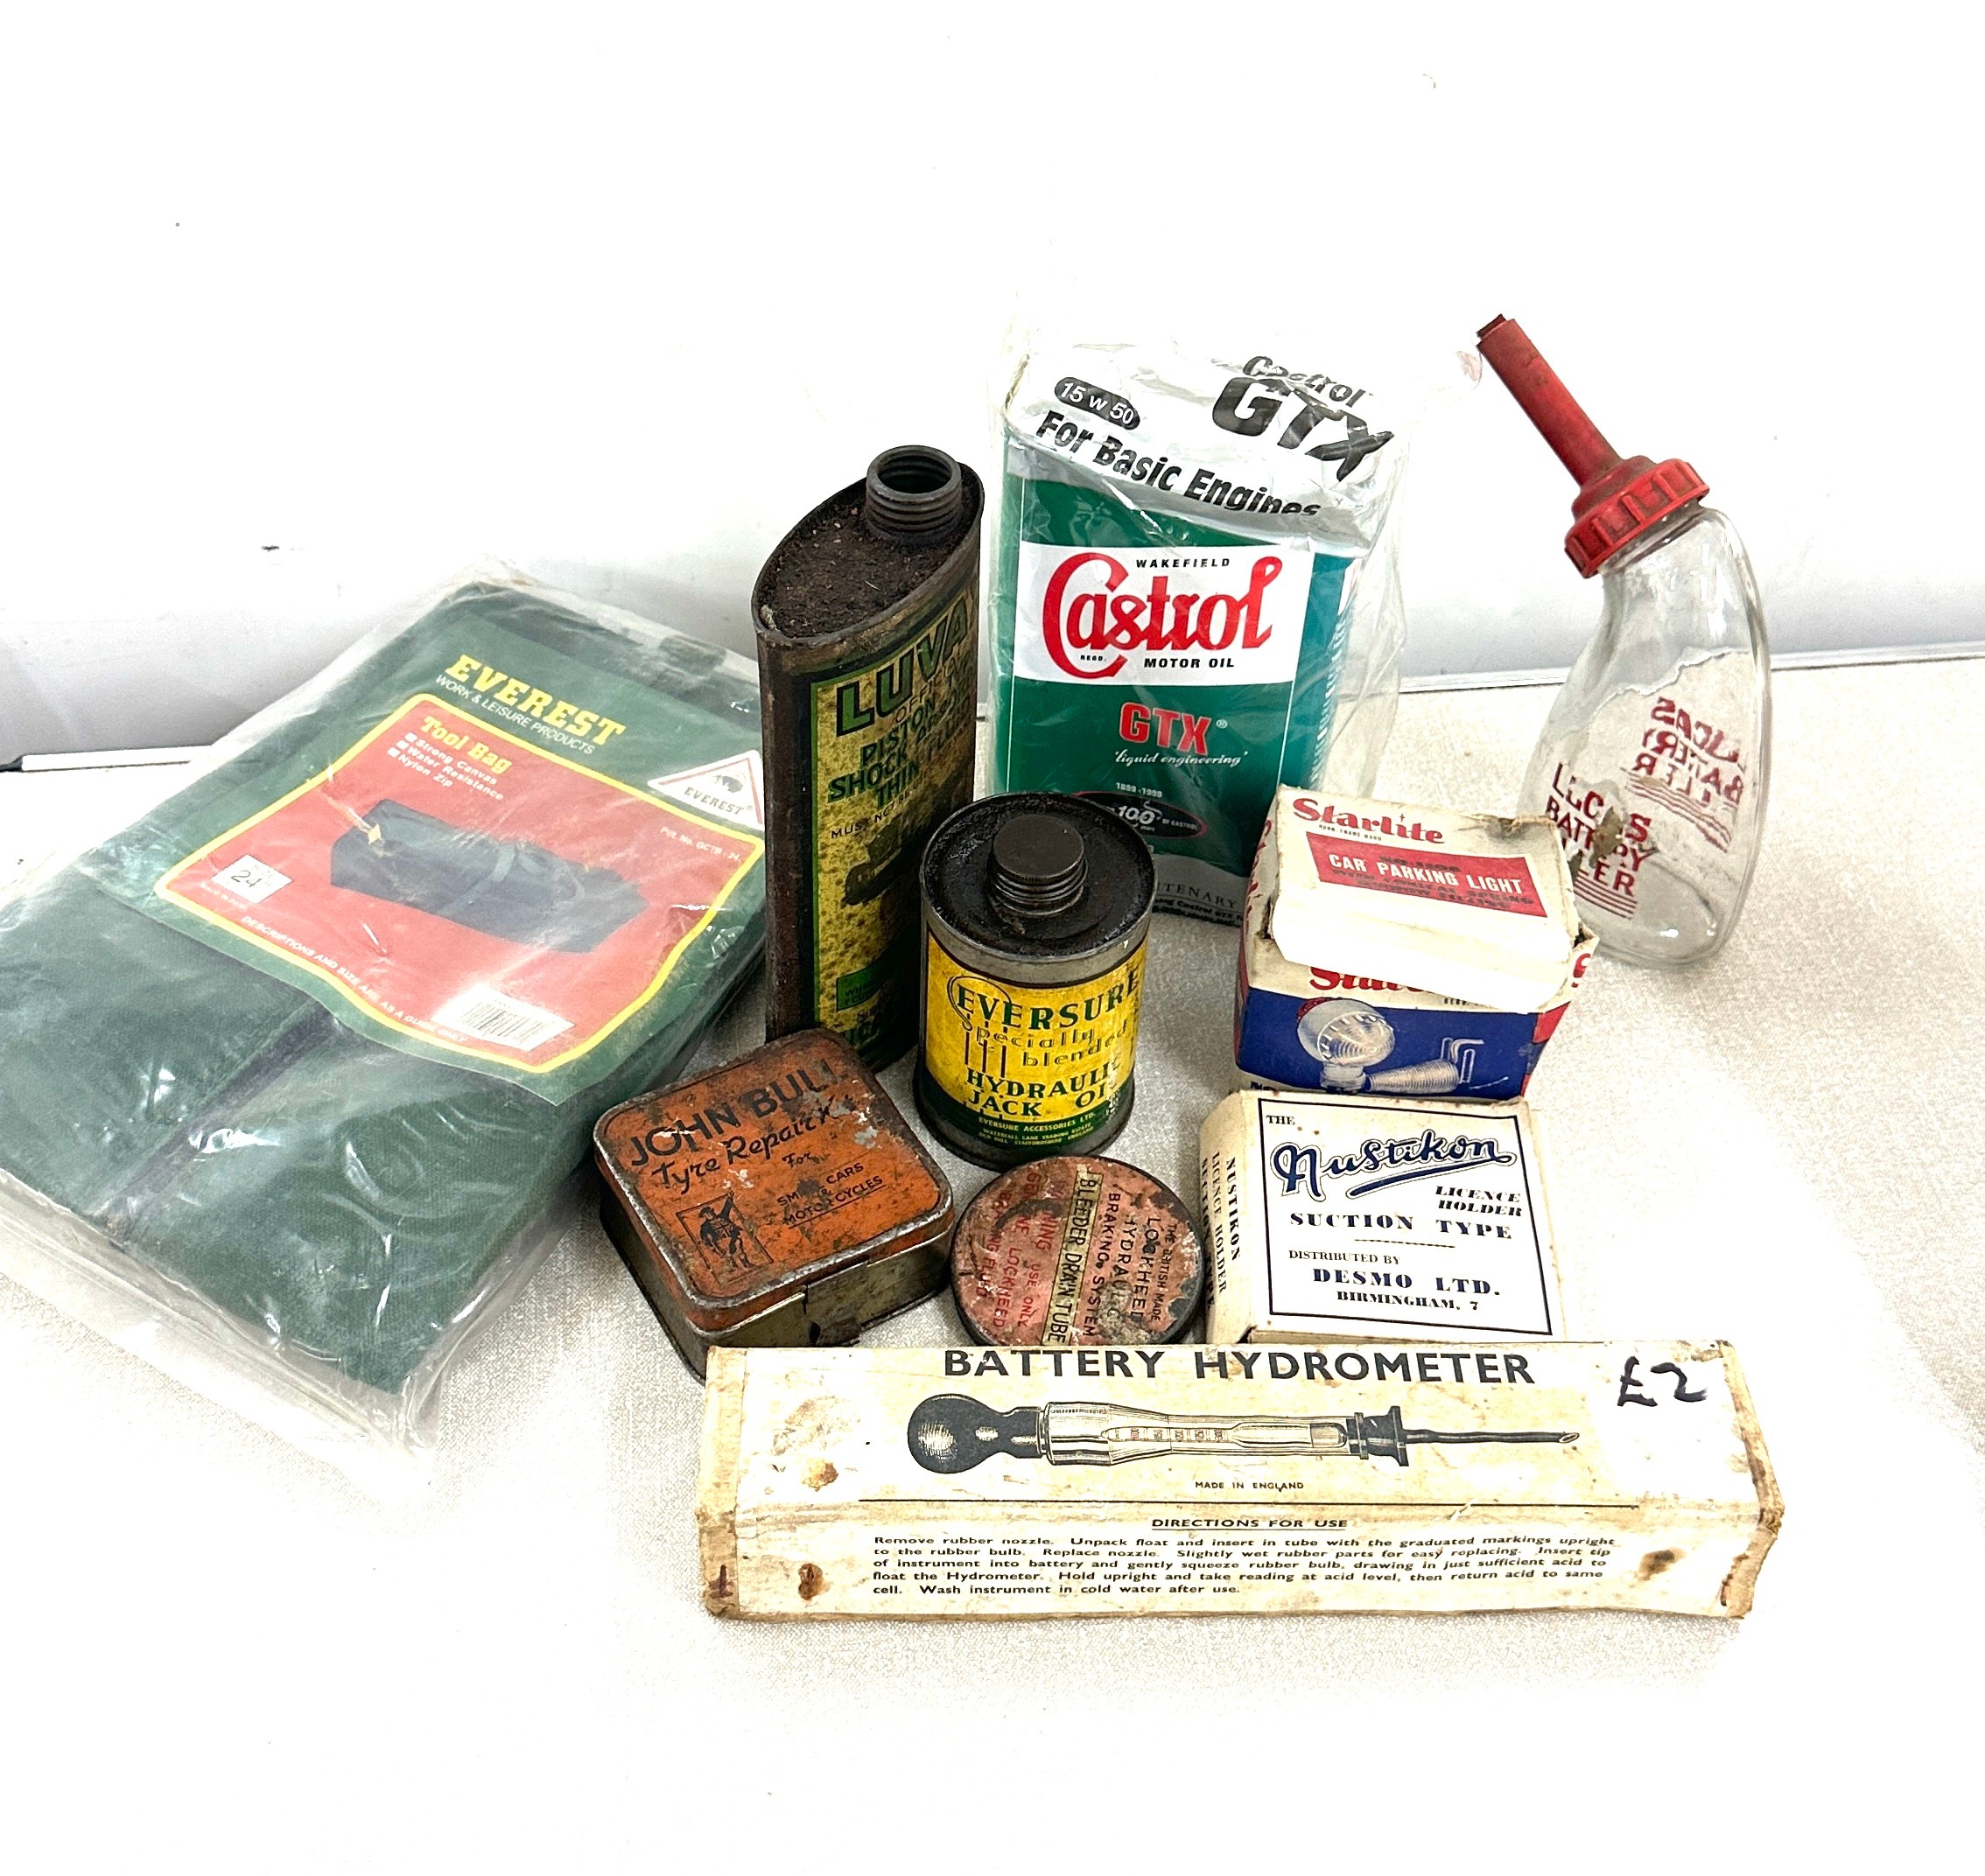 Selection of vintage advertising collectables to include Castrol Motor Oil can- un opened, Battery